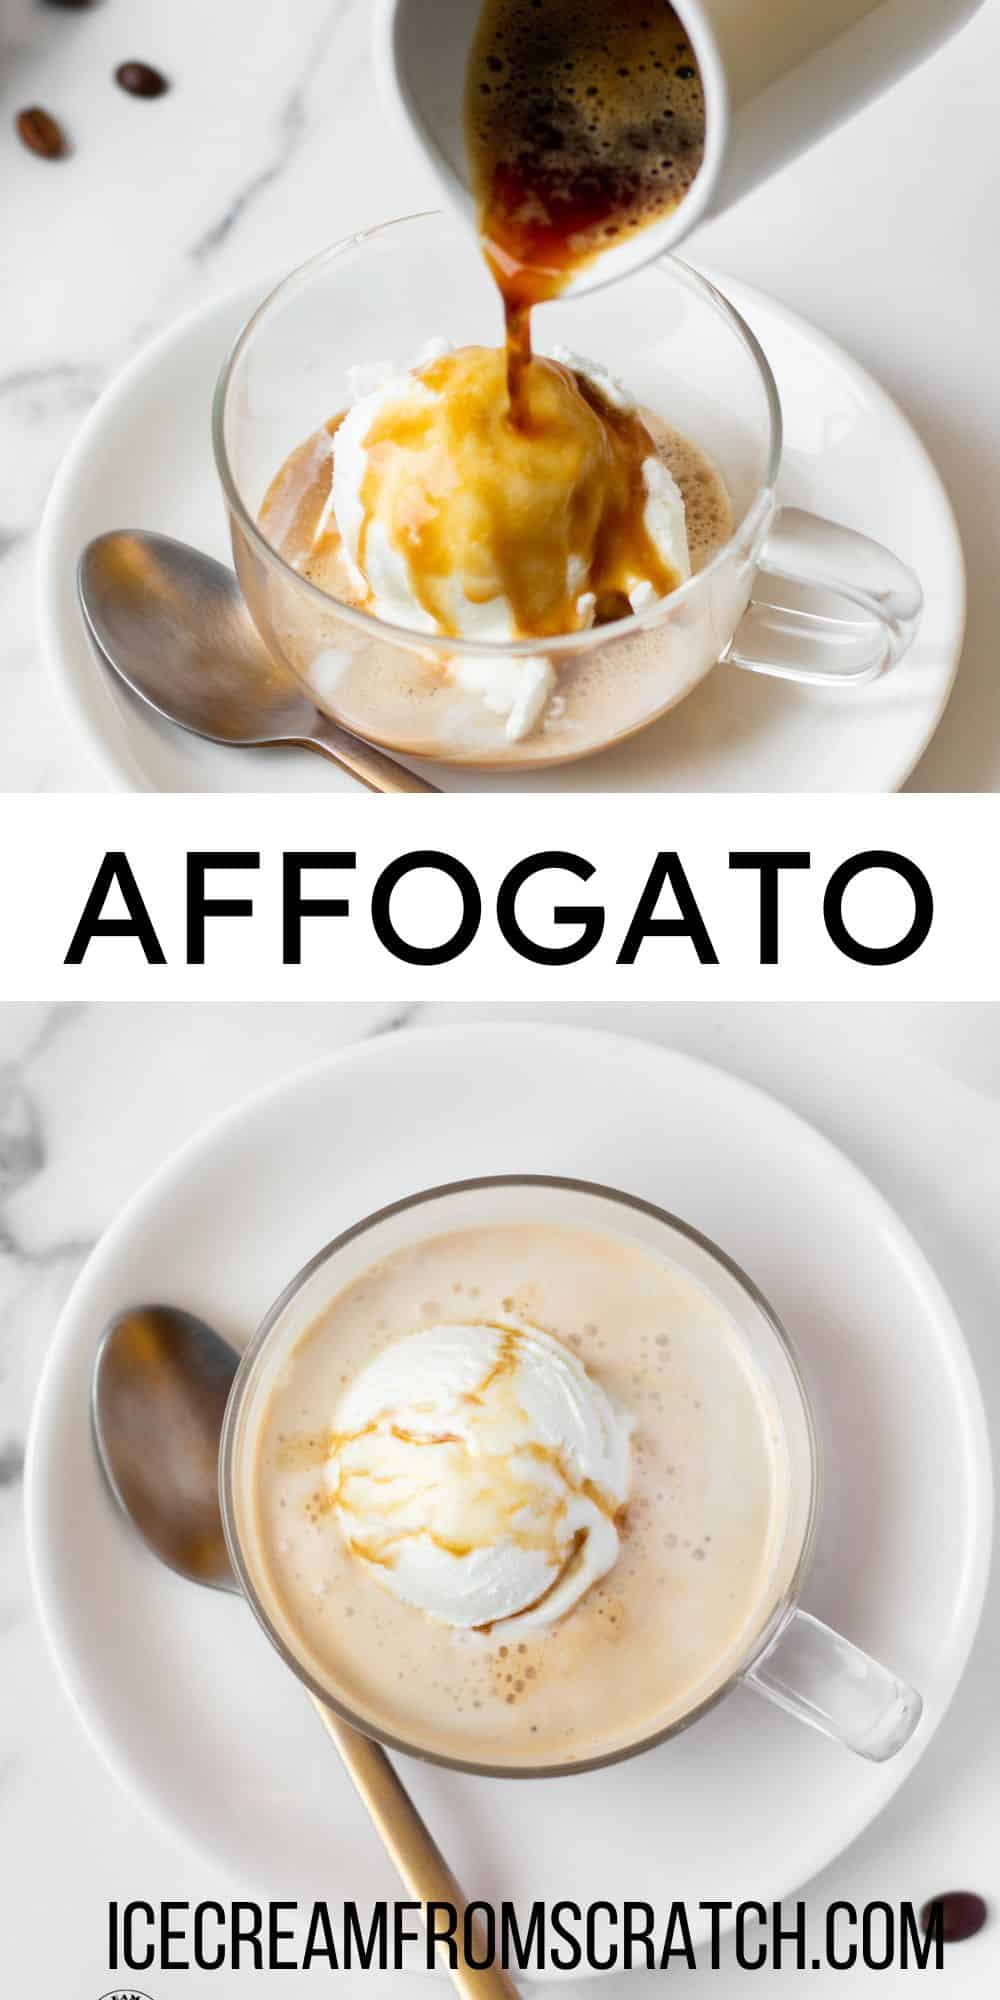 Two images of affogato in a glass mug.